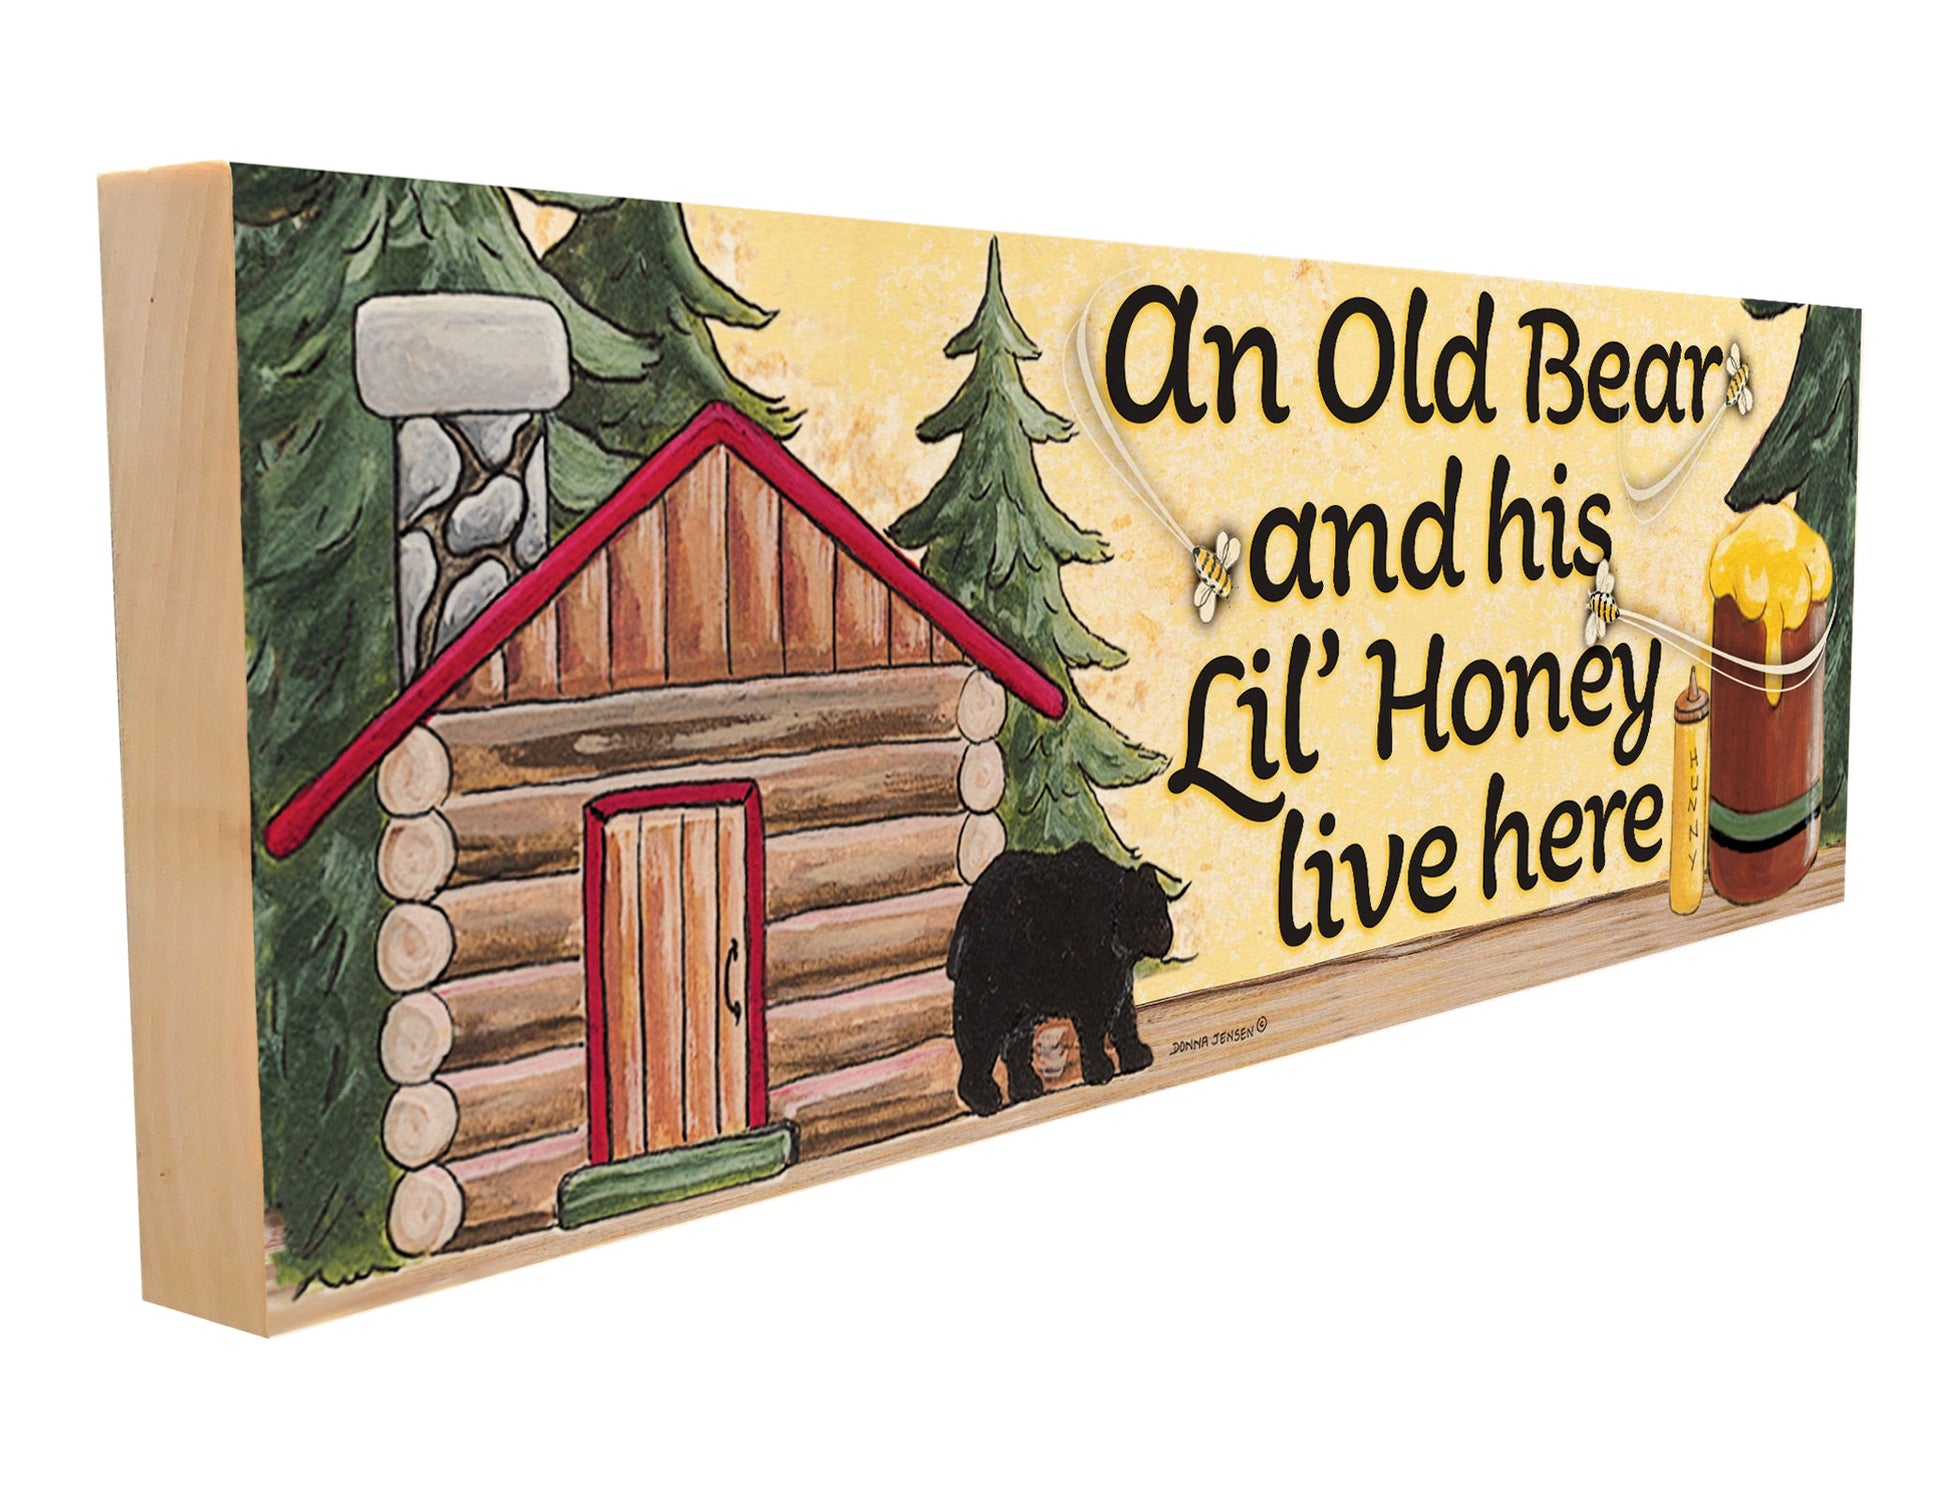 Old Bear and his Lil' Honey Live Here.